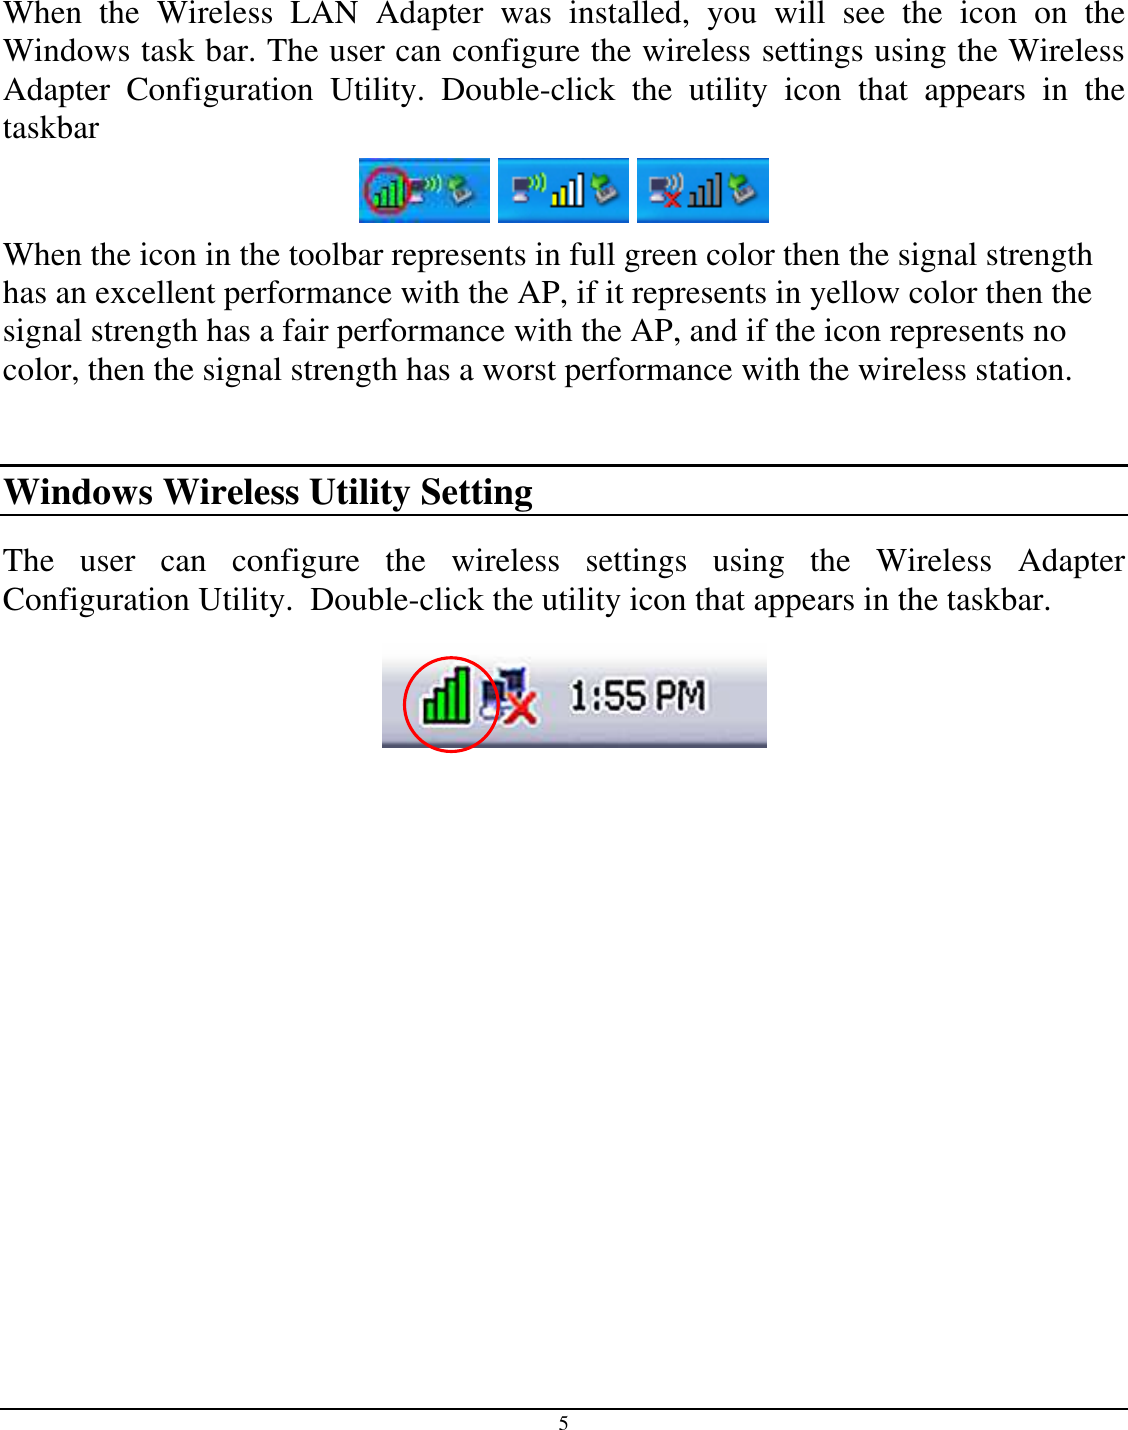 5    When  the  Wireless  LAN  Adapter  was  installed,  you  will  see  the  icon  on  the Windows task bar. The user can configure the wireless settings using the Wireless Adapter  Configuration  Utility.  Double-click  the  utility  icon  that  appears  in  the taskbar      When the icon in the toolbar represents in full green color then the signal strength has an excellent performance with the AP, if it represents in yellow color then the signal strength has a fair performance with the AP, and if the icon represents no color, then the signal strength has a worst performance with the wireless station.  Windows Wireless Utility Setting The  user  can  configure  the  wireless  settings  using  the  Wireless  Adapter Configuration Utility.  Double-click the utility icon that appears in the taskbar.  